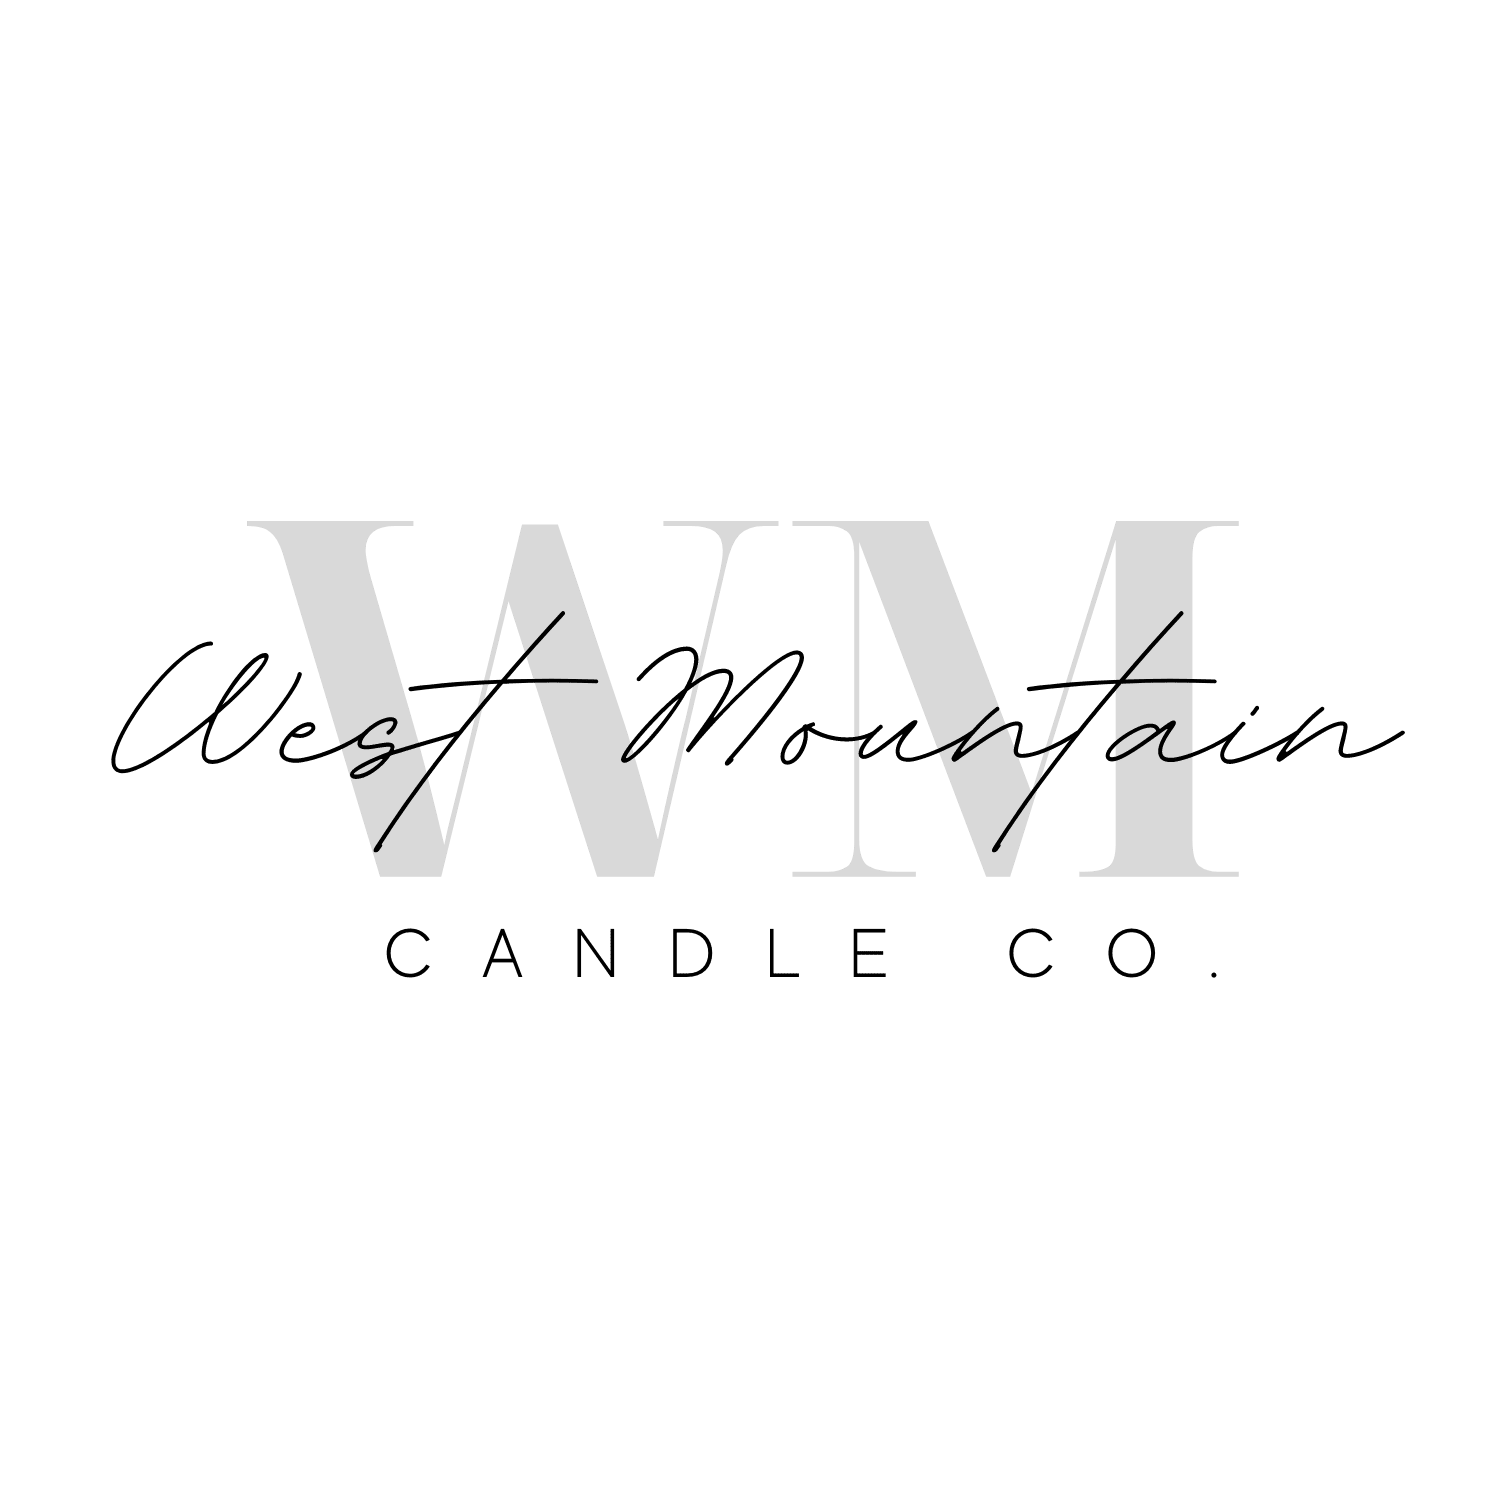 West Mountain Candle Co.